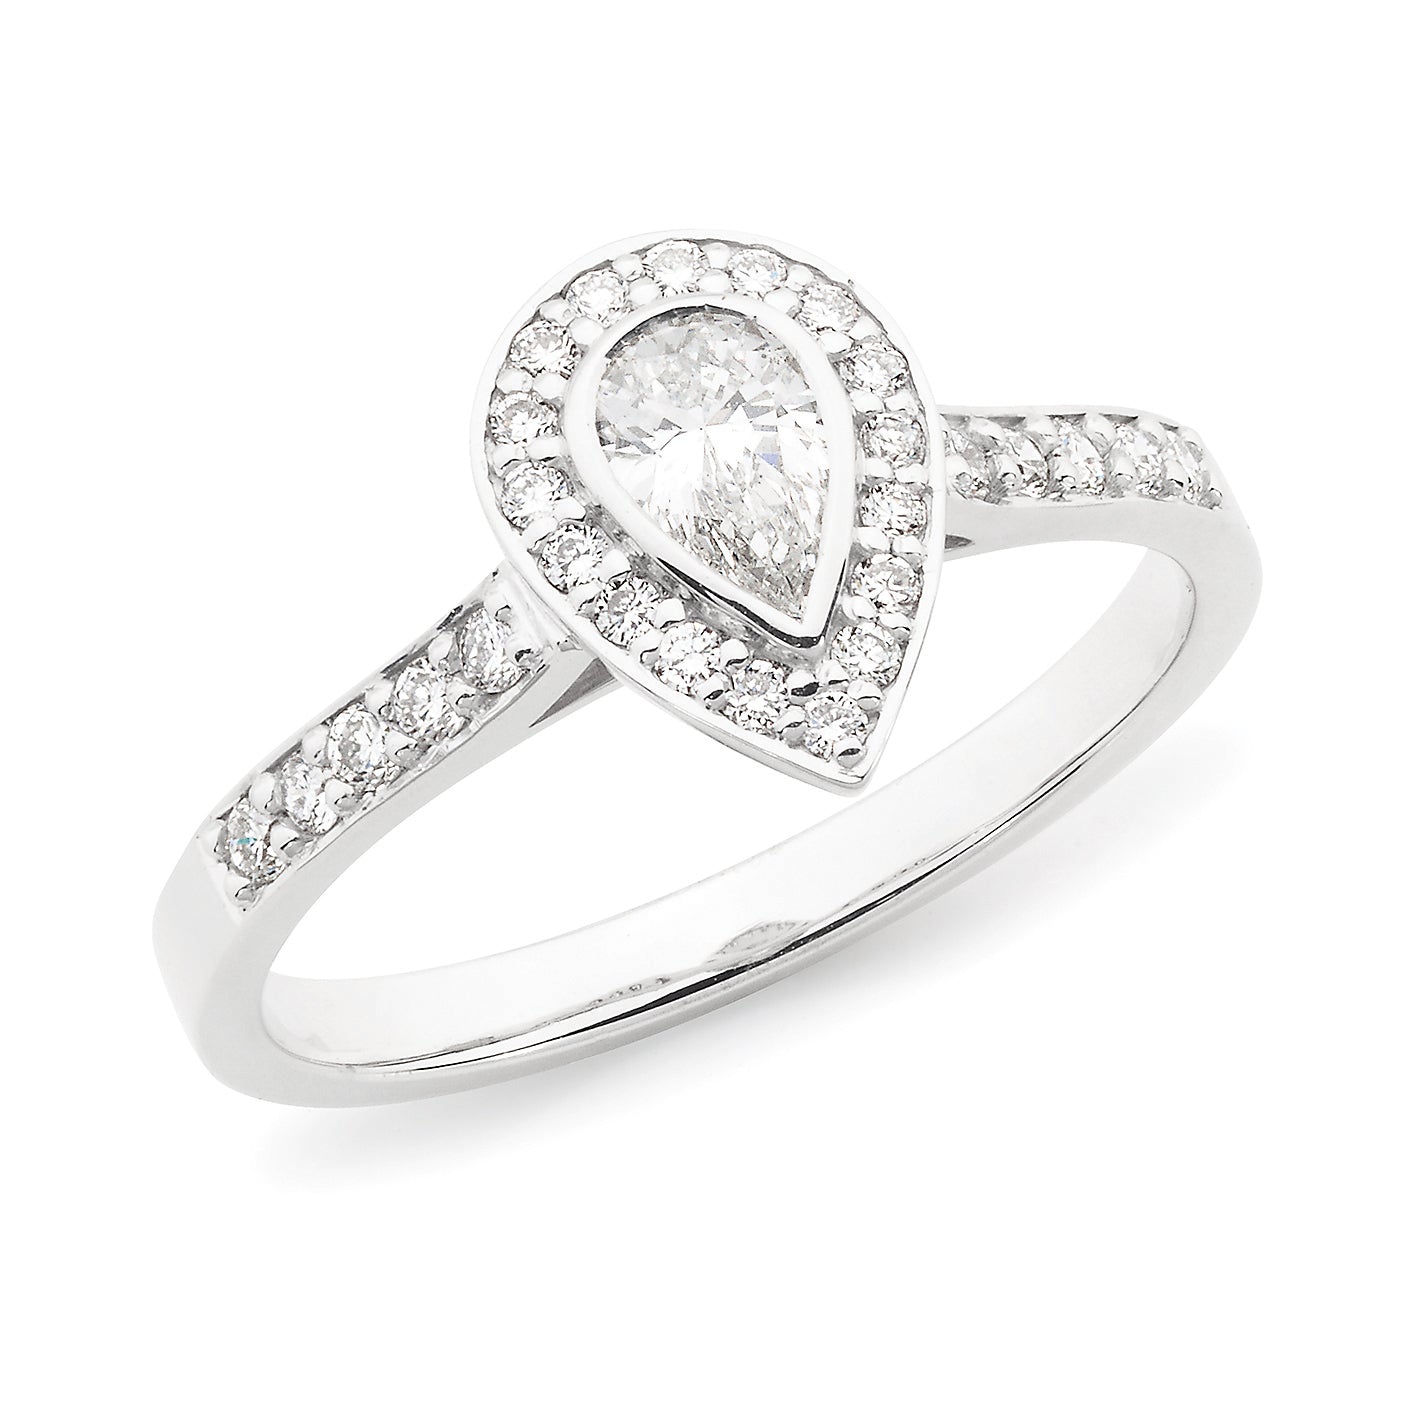 Diamond Set Halo Engagement Ring in 18ct White Gold